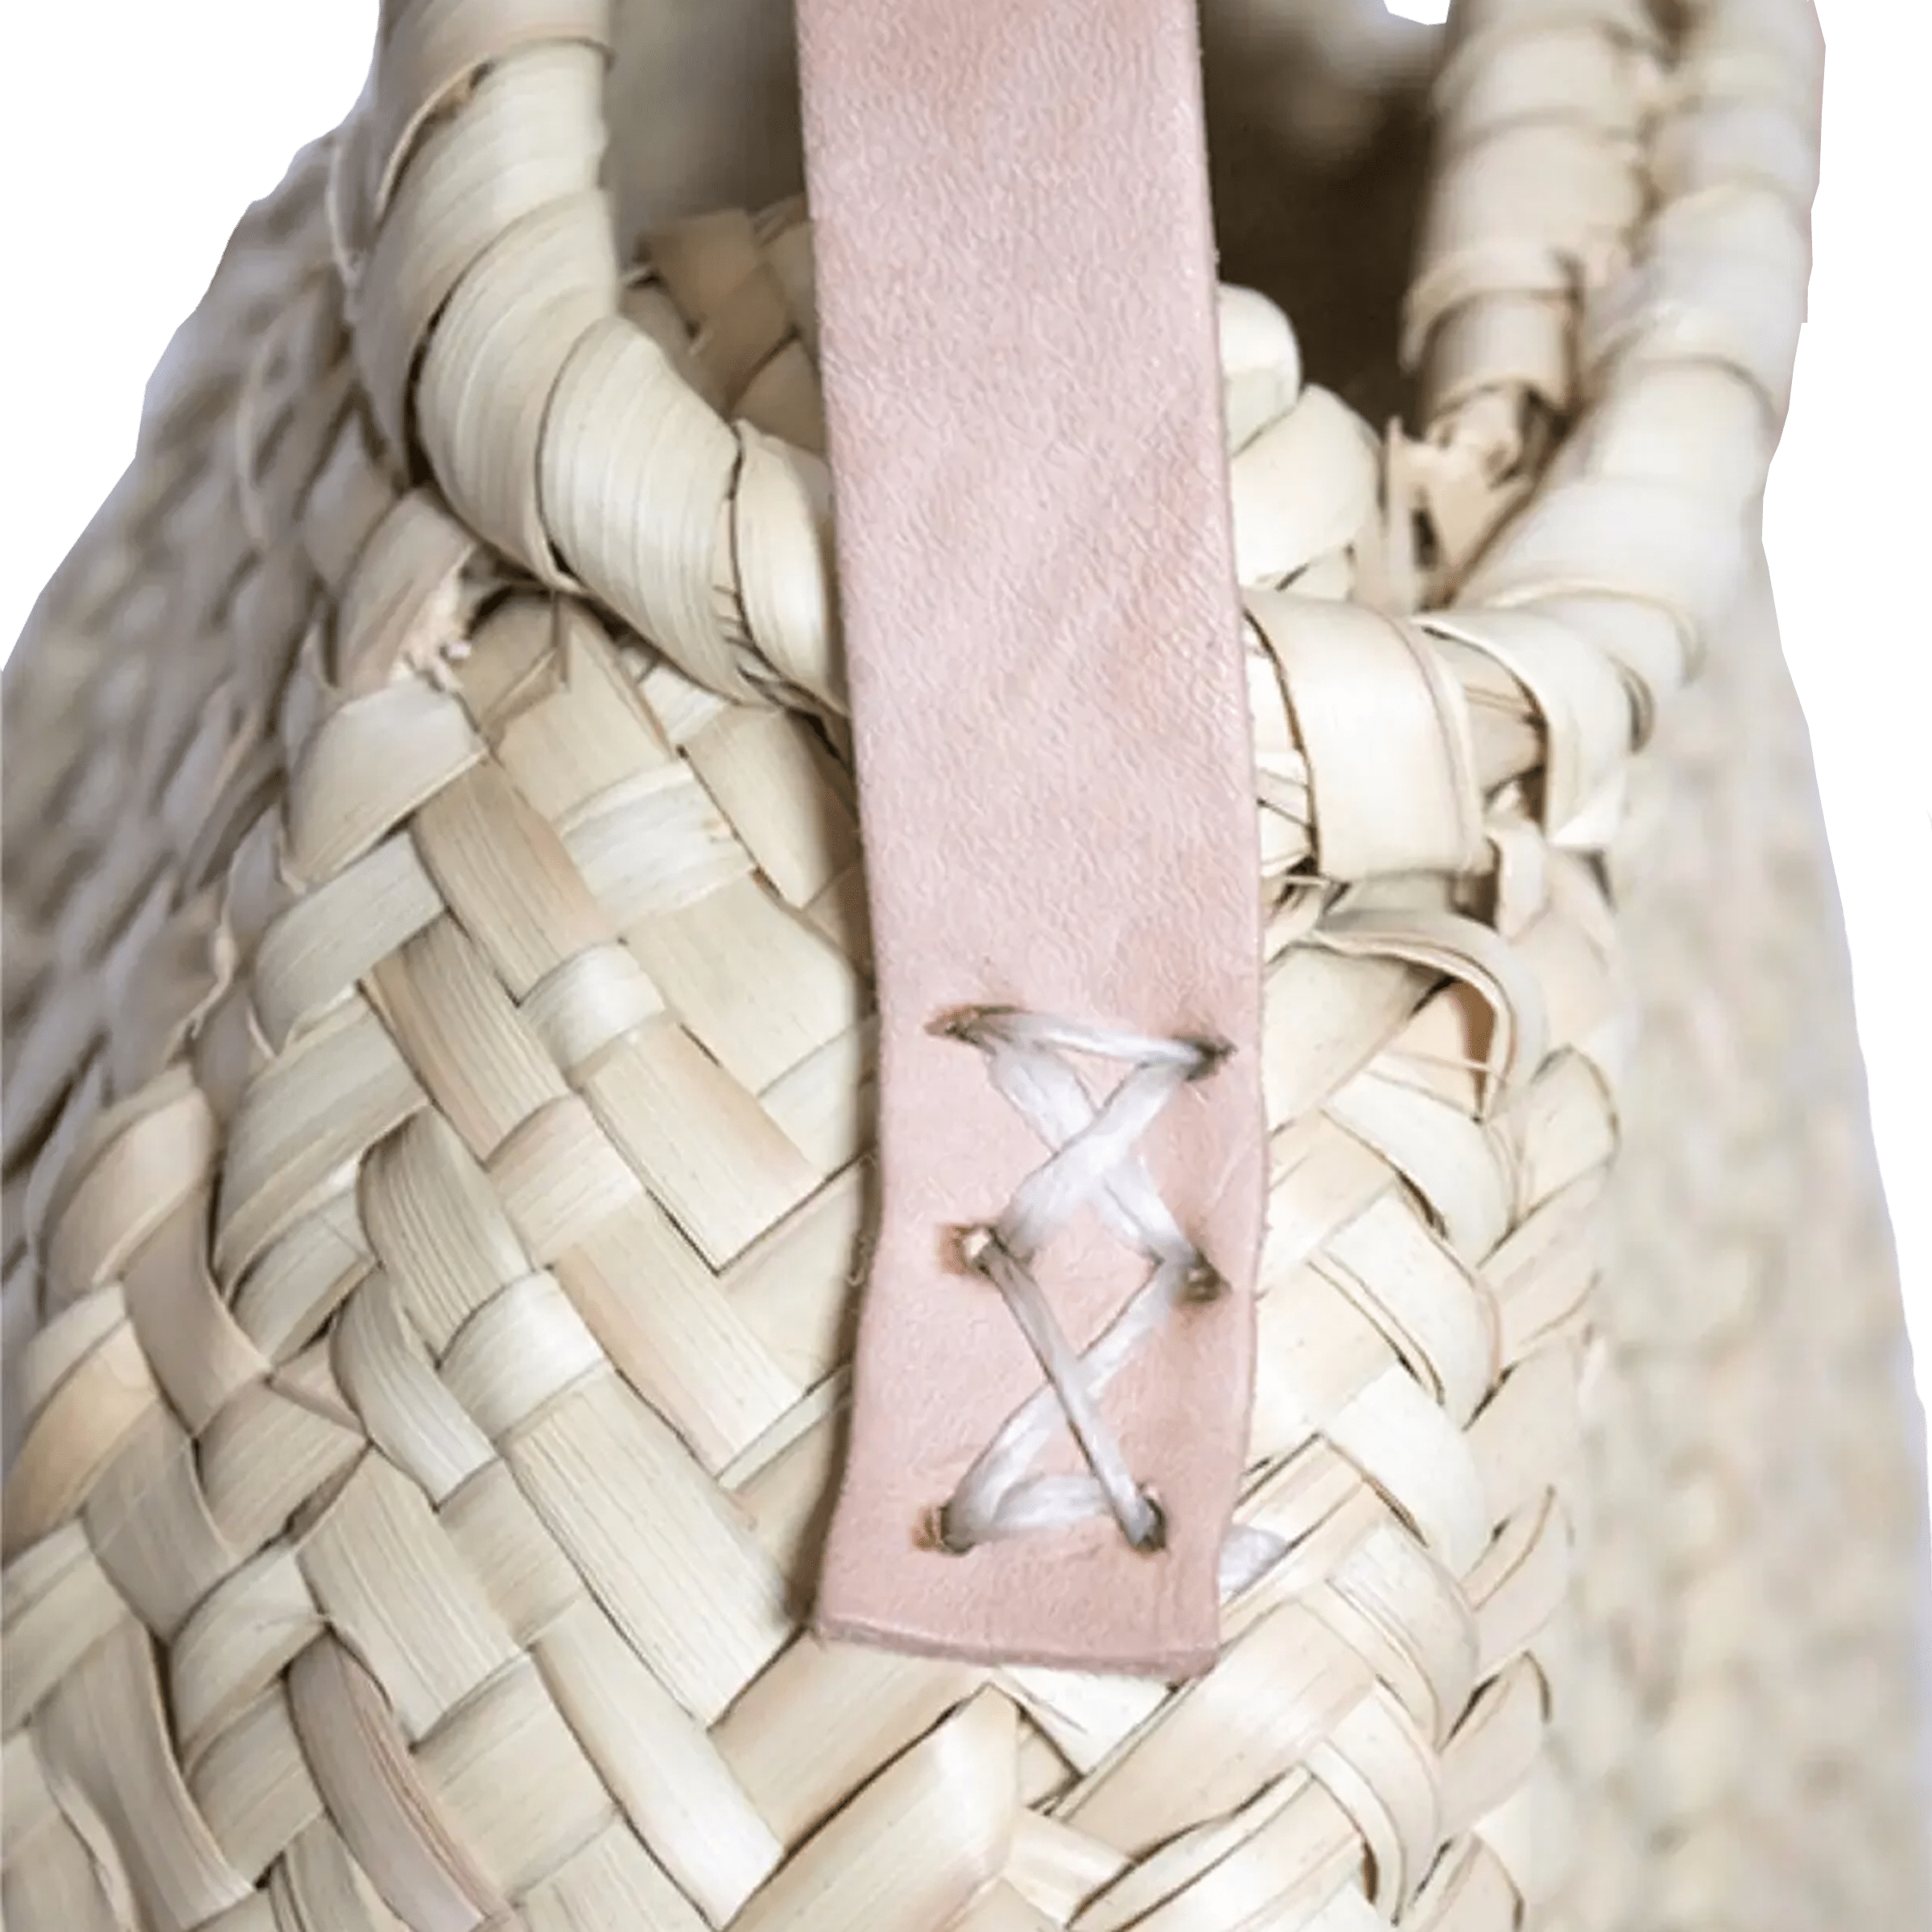 Round Straw Bag with Leather Long Handle